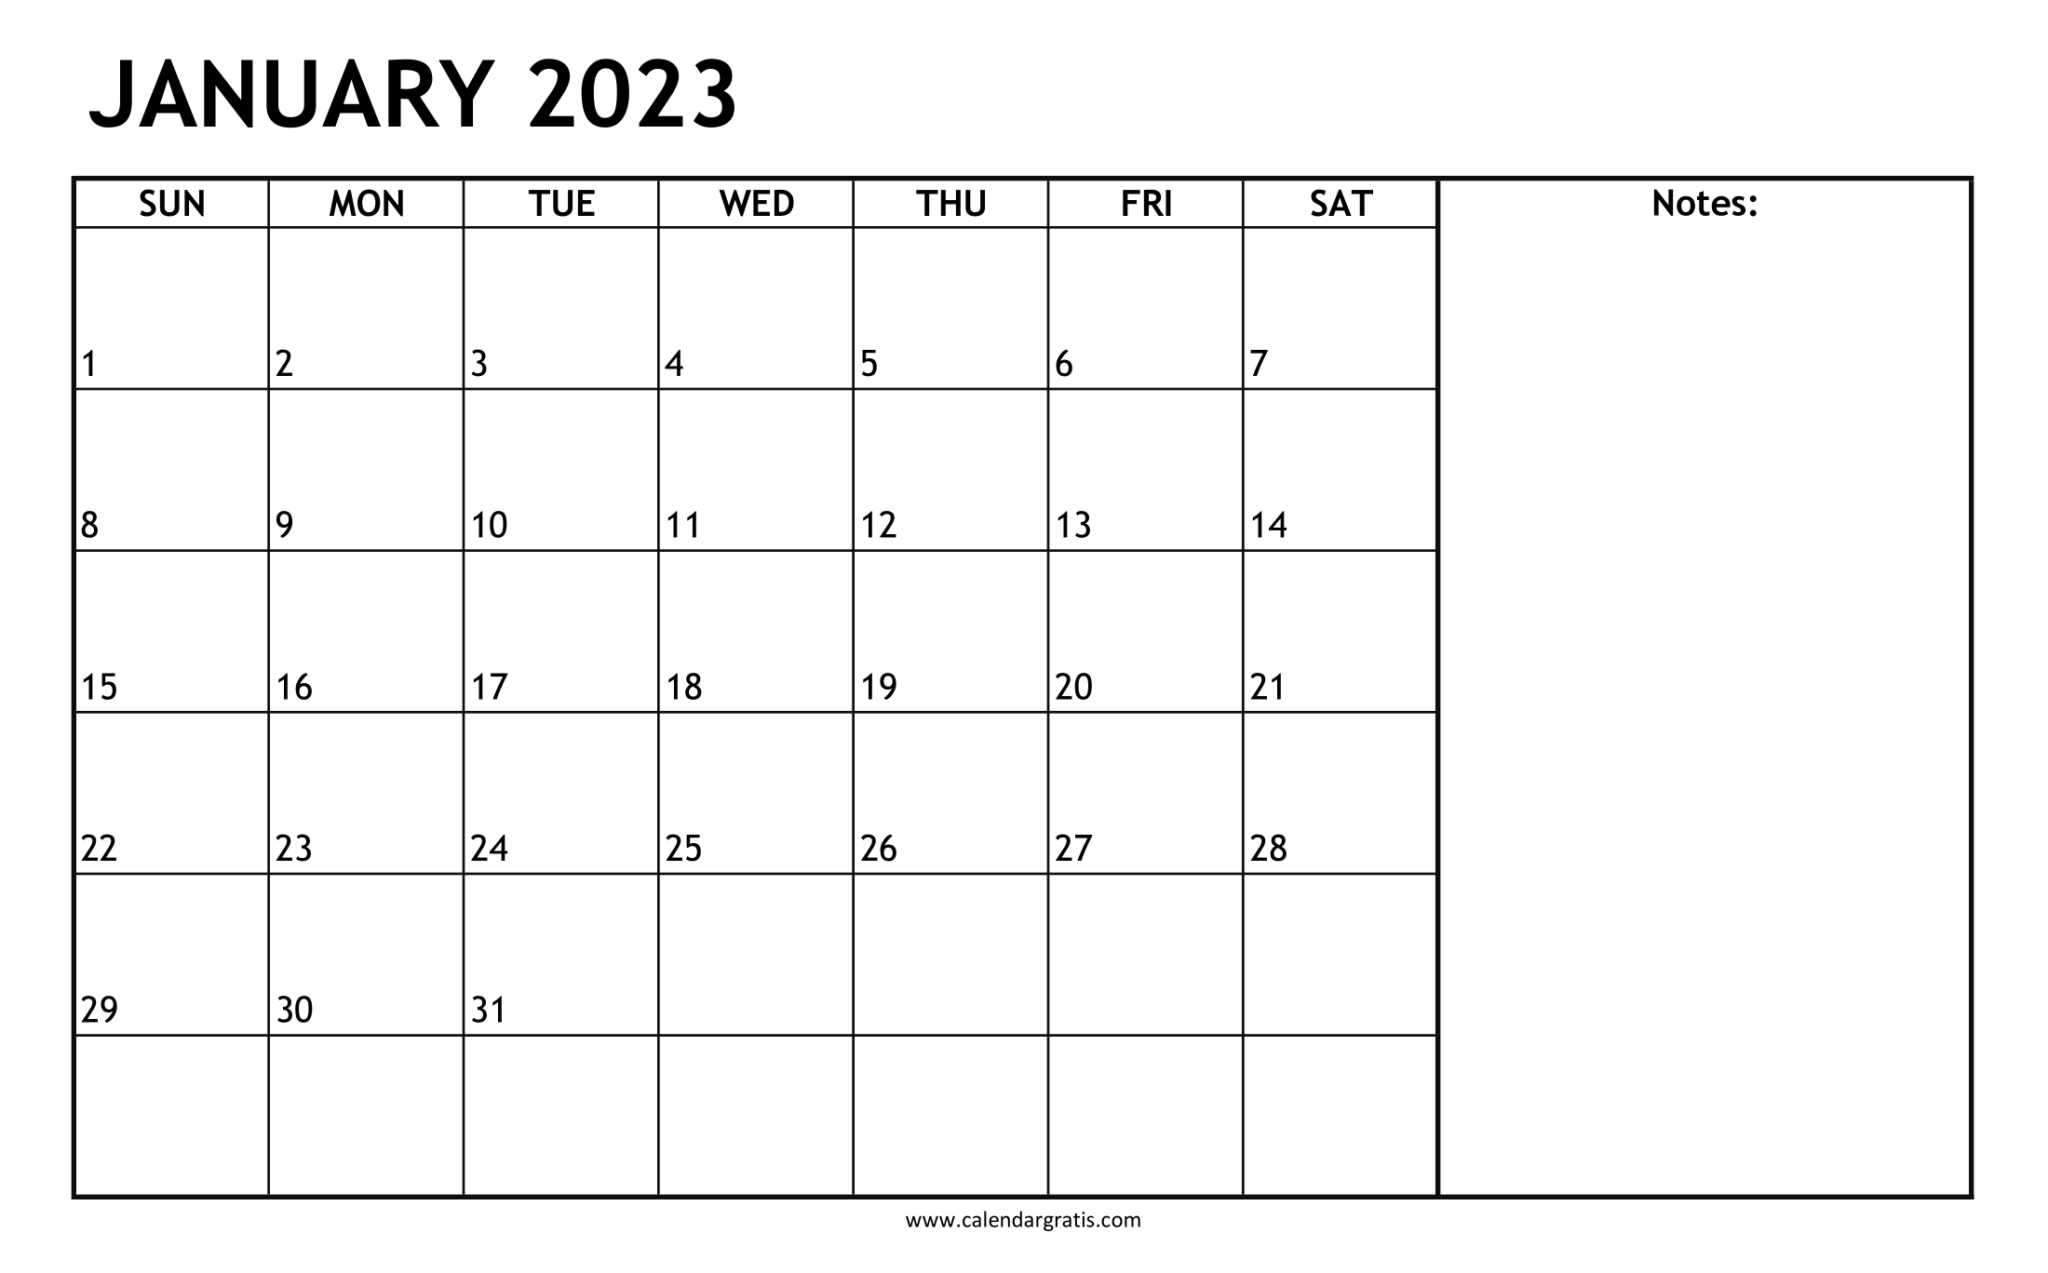 January 2023 Calendar With Notes Section Printable Monthly Planner 9224